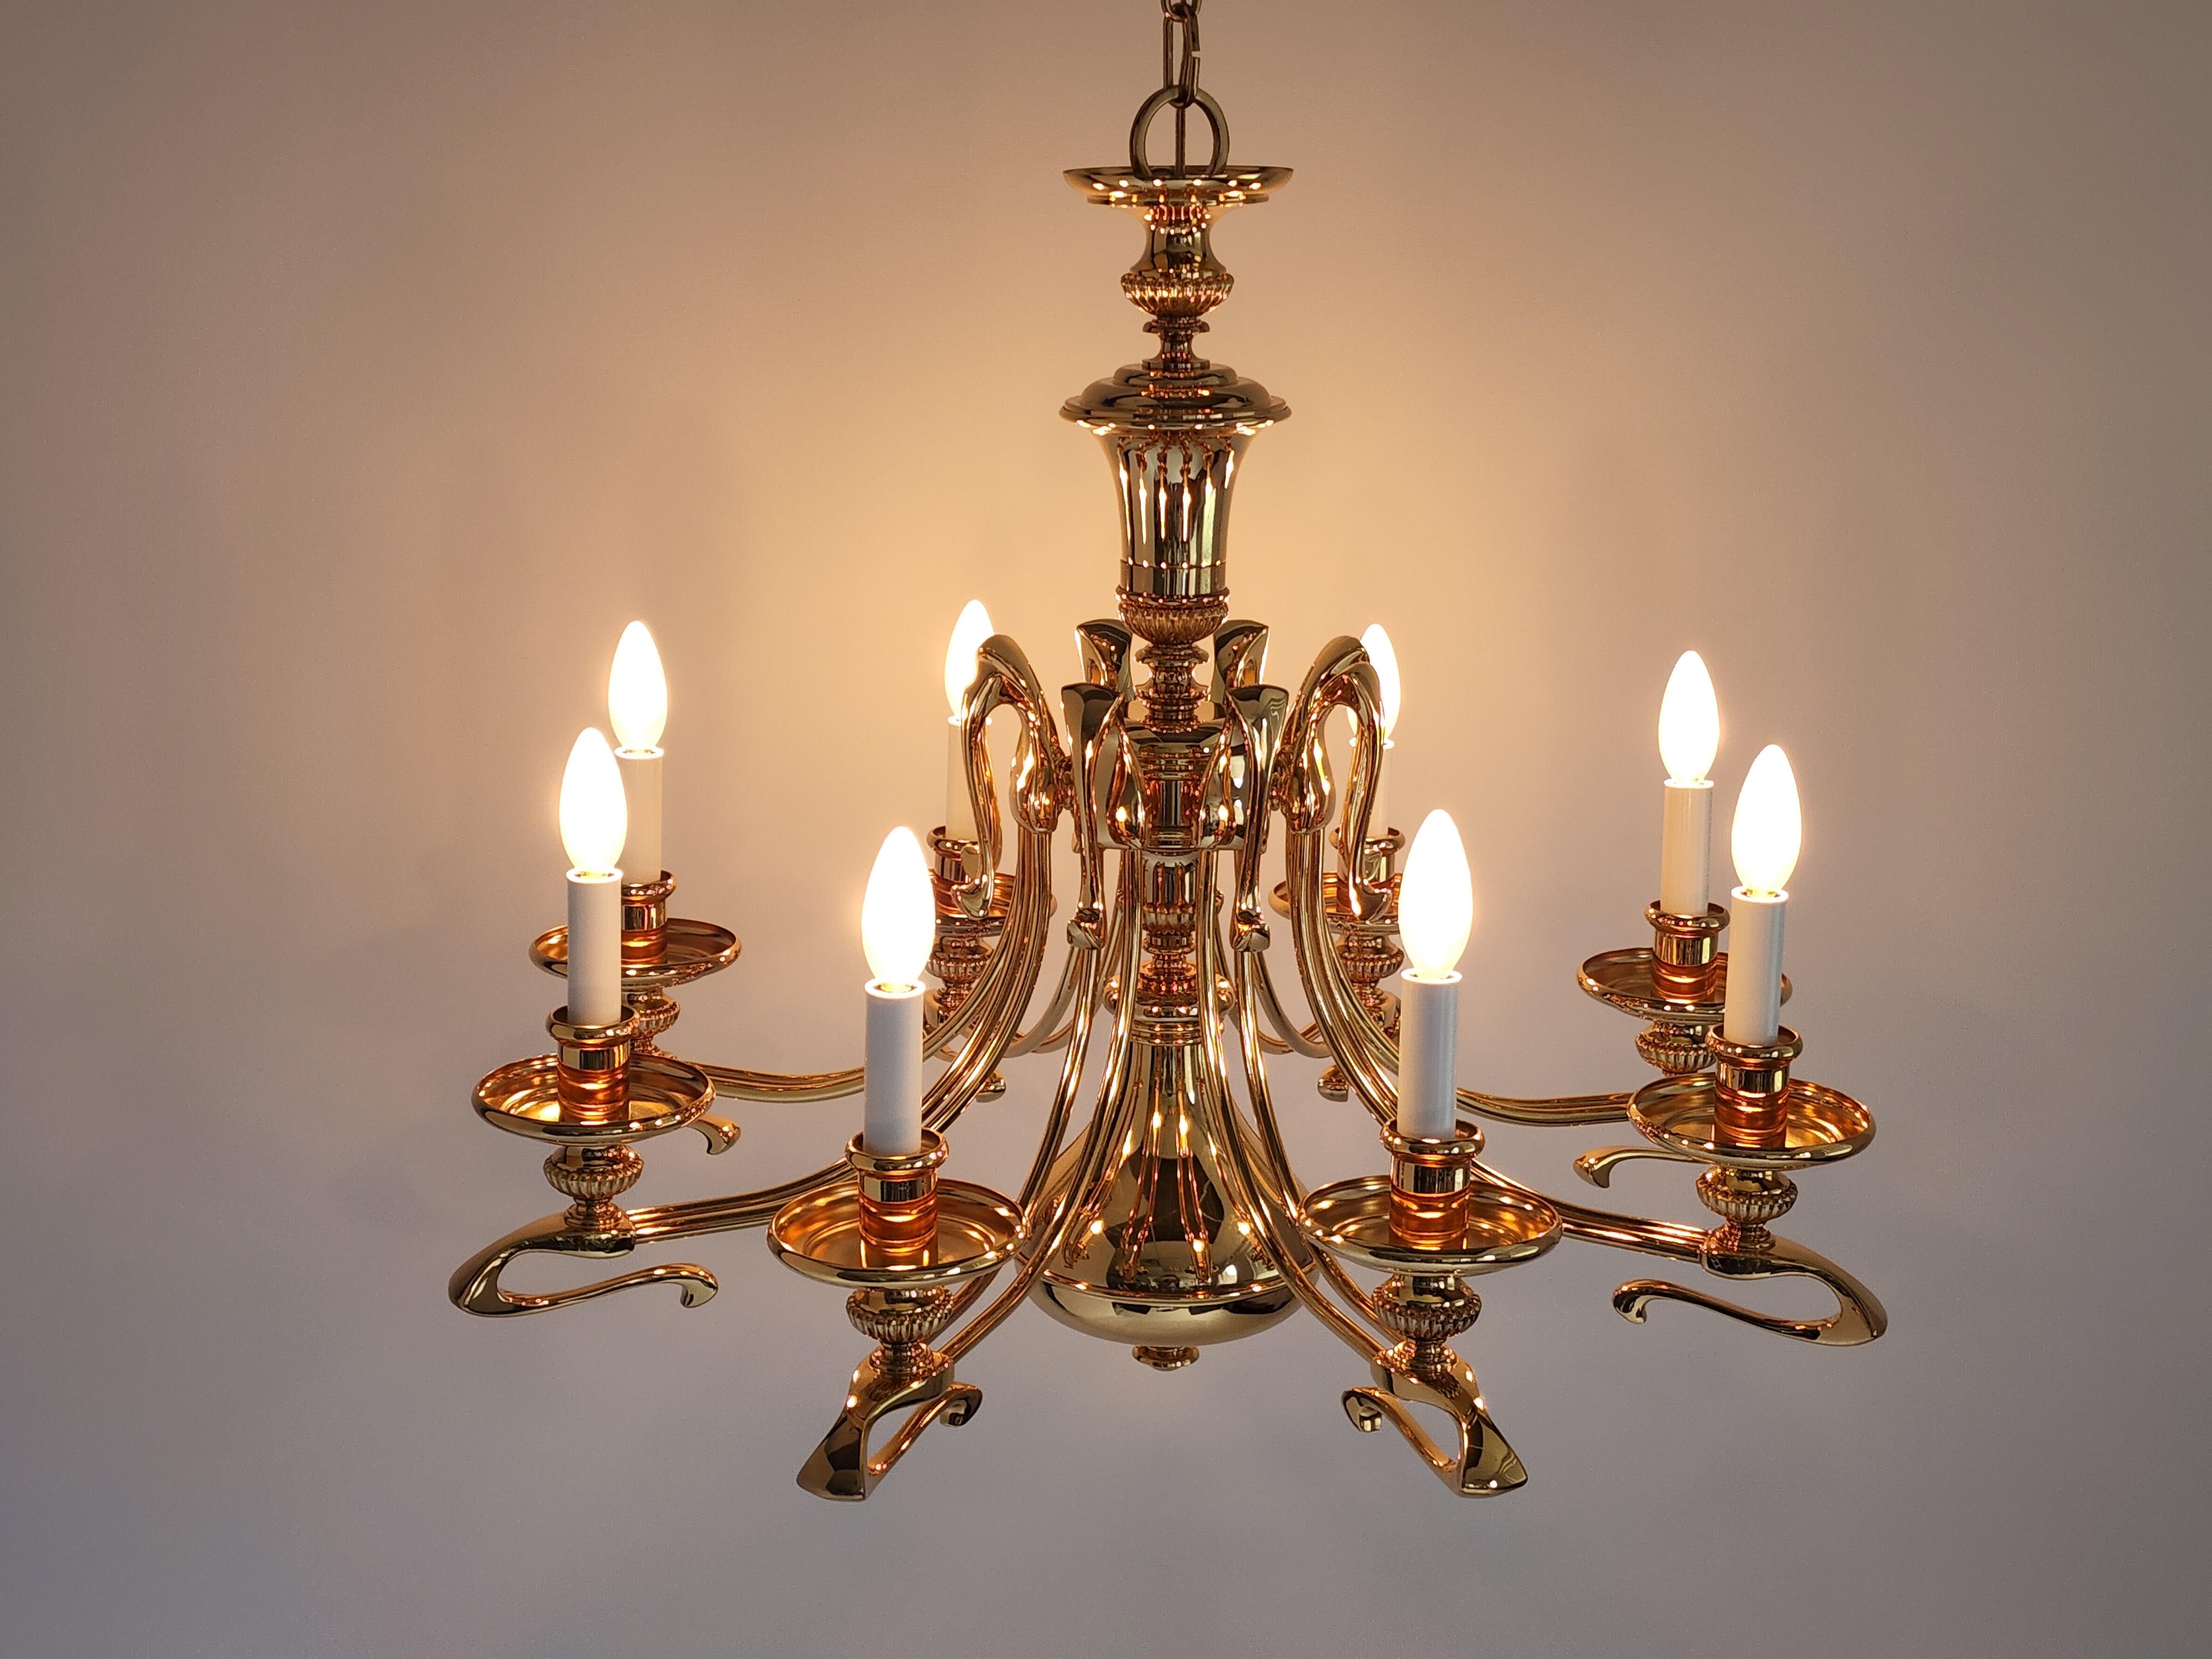 1980s Massive Art Nouveau Style Gold Plated Chandelier, Italy For Sale 1